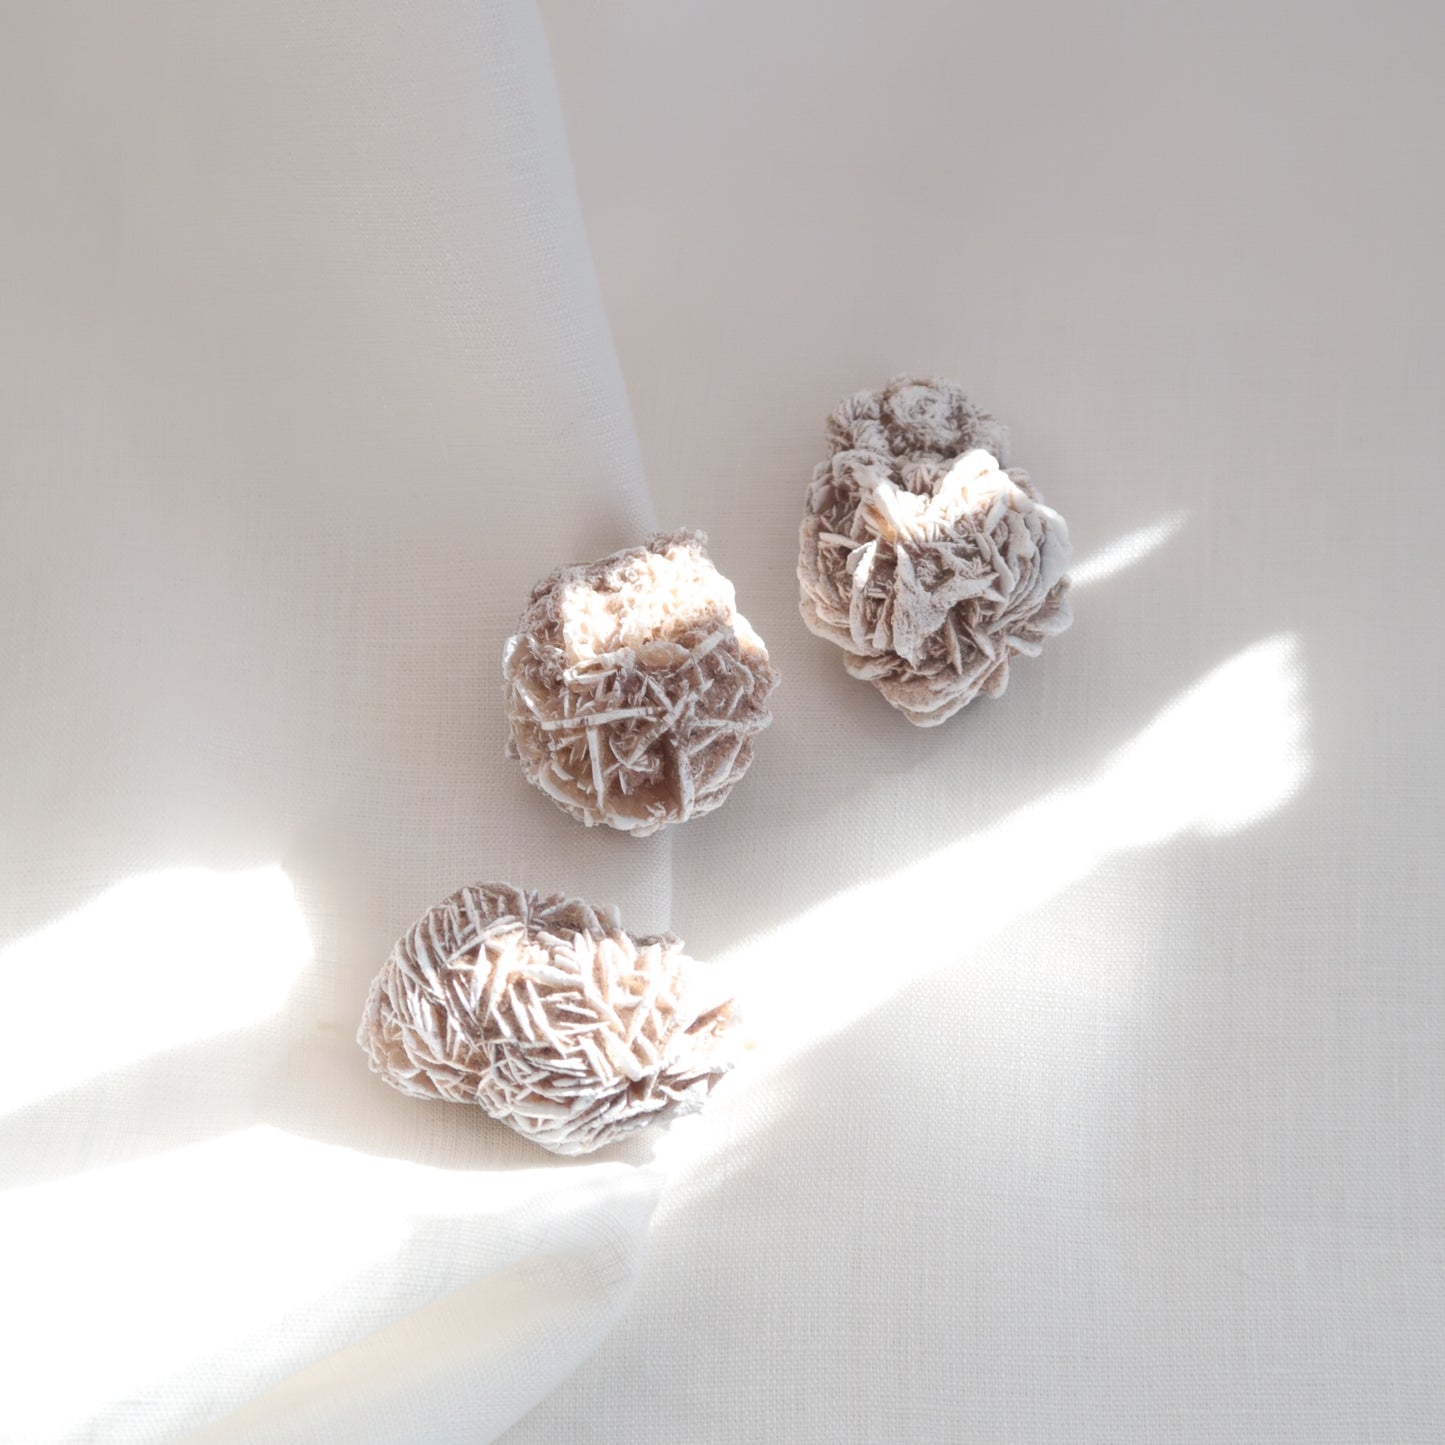 Three Natural Raw White and Beige Desert Rose Crystal Clusters